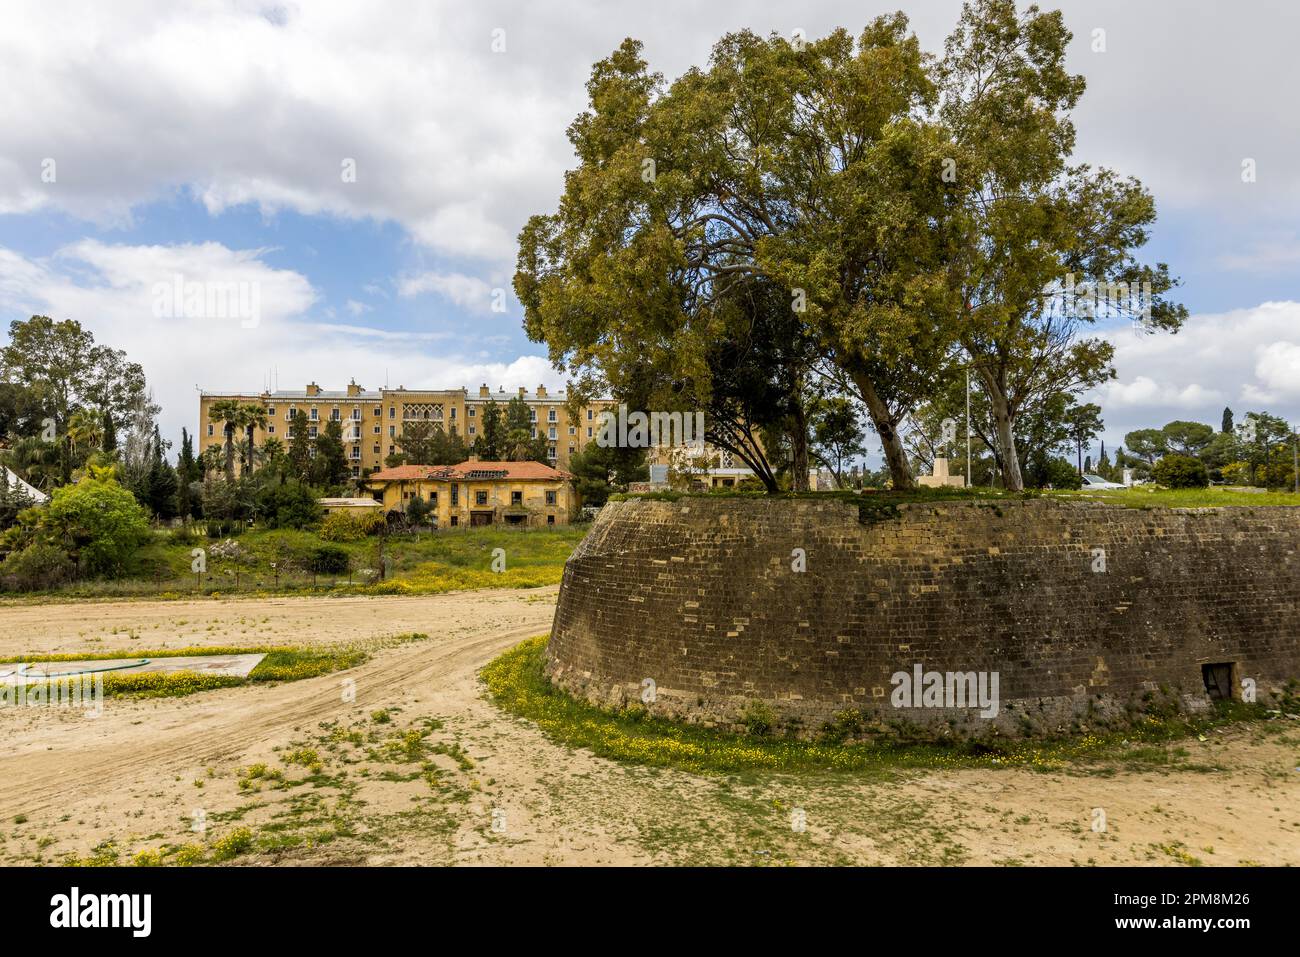 View from the north of Nicosia to the south. On the right, parts of the Venetian Wall. In the background the former luxury hotel Ledra Palace. Lefkoşa Türk Belediyesi, Cyprus Stock Photo